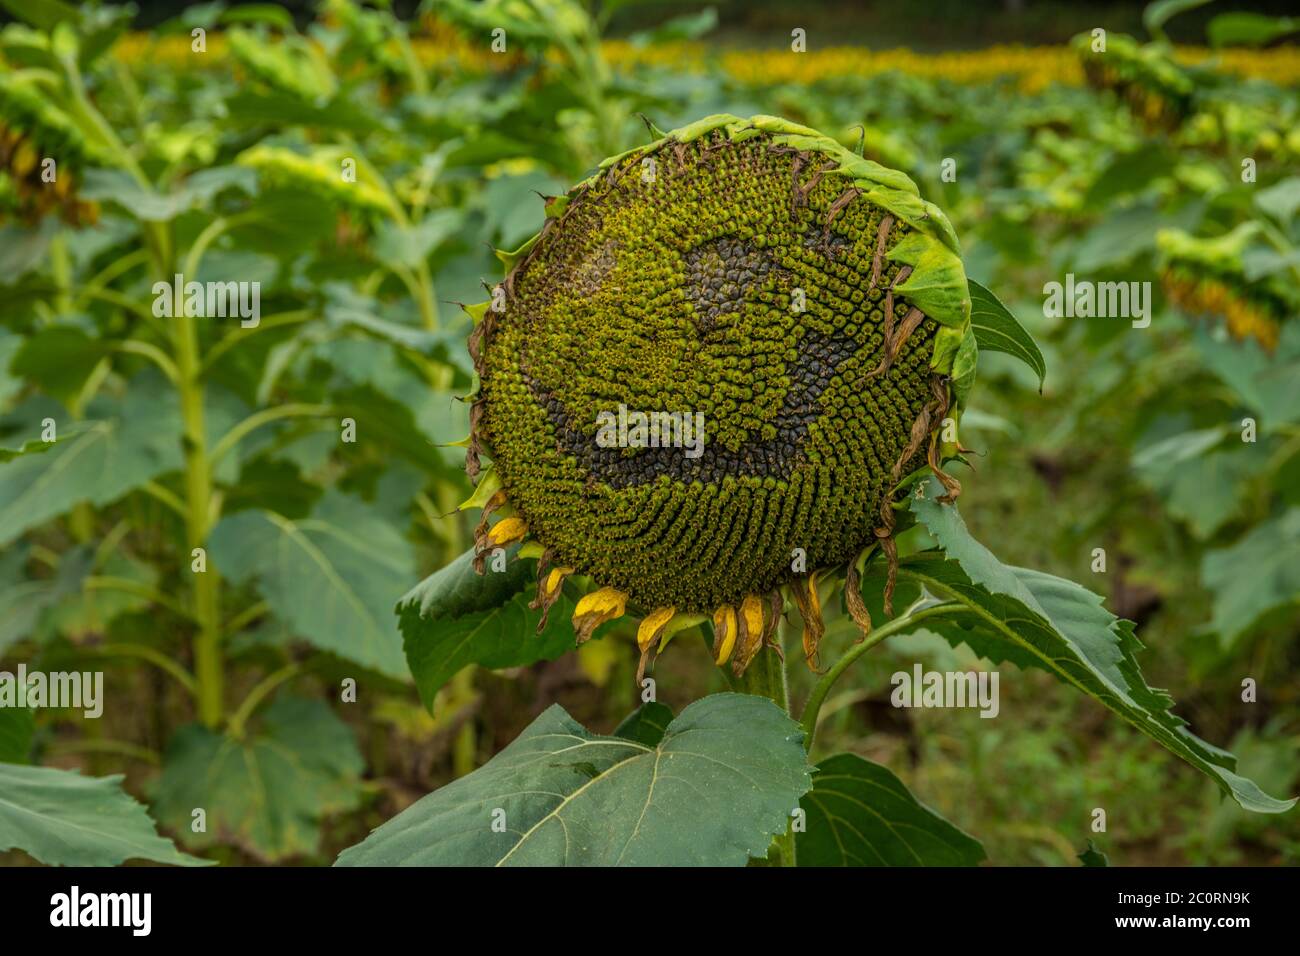 A smiling sunflower in a field with the seeds exposed in the shape of eyes and a mouth making for a happy plant at the end of its life with rows of su Stock Photo